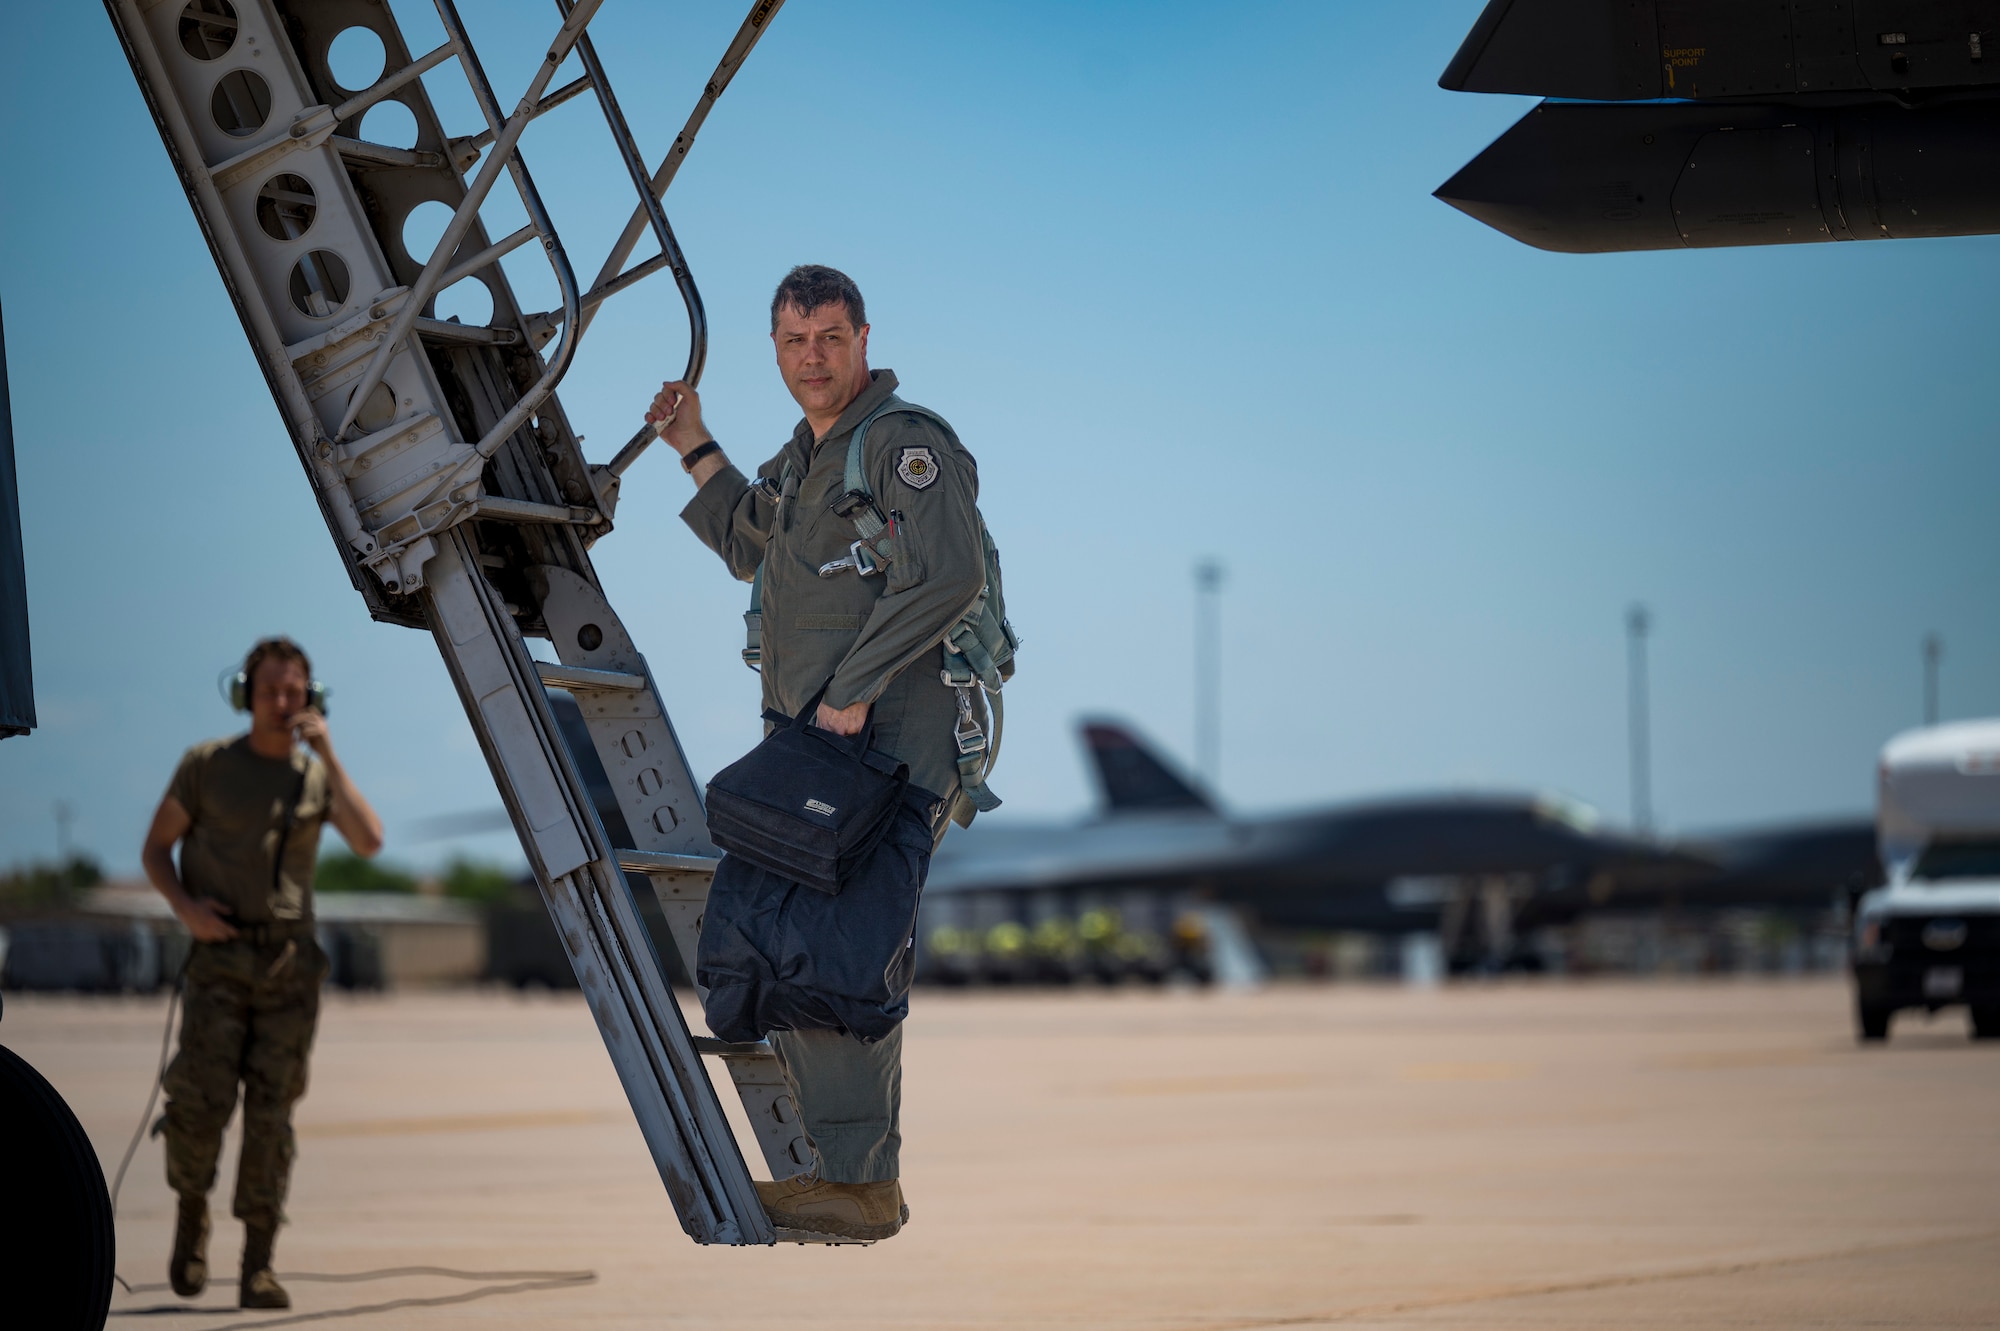 Maj. Gen. Andrew Gebara, 8th Air Force and Joint-Global Strike Operations Center commander, exits a B-1B Lancer flight after accompanying 9th Bomb Squadron personnel at Dyess Air Force Base, Texas, April 29, 2022. The 8th Air Force command team used the visit as an opportunity to discuss the importance of Striker Airmen and the role they play in support of the global strike mission. (U.S. Air Force photo by Airman 1st Class Josiah Brown)